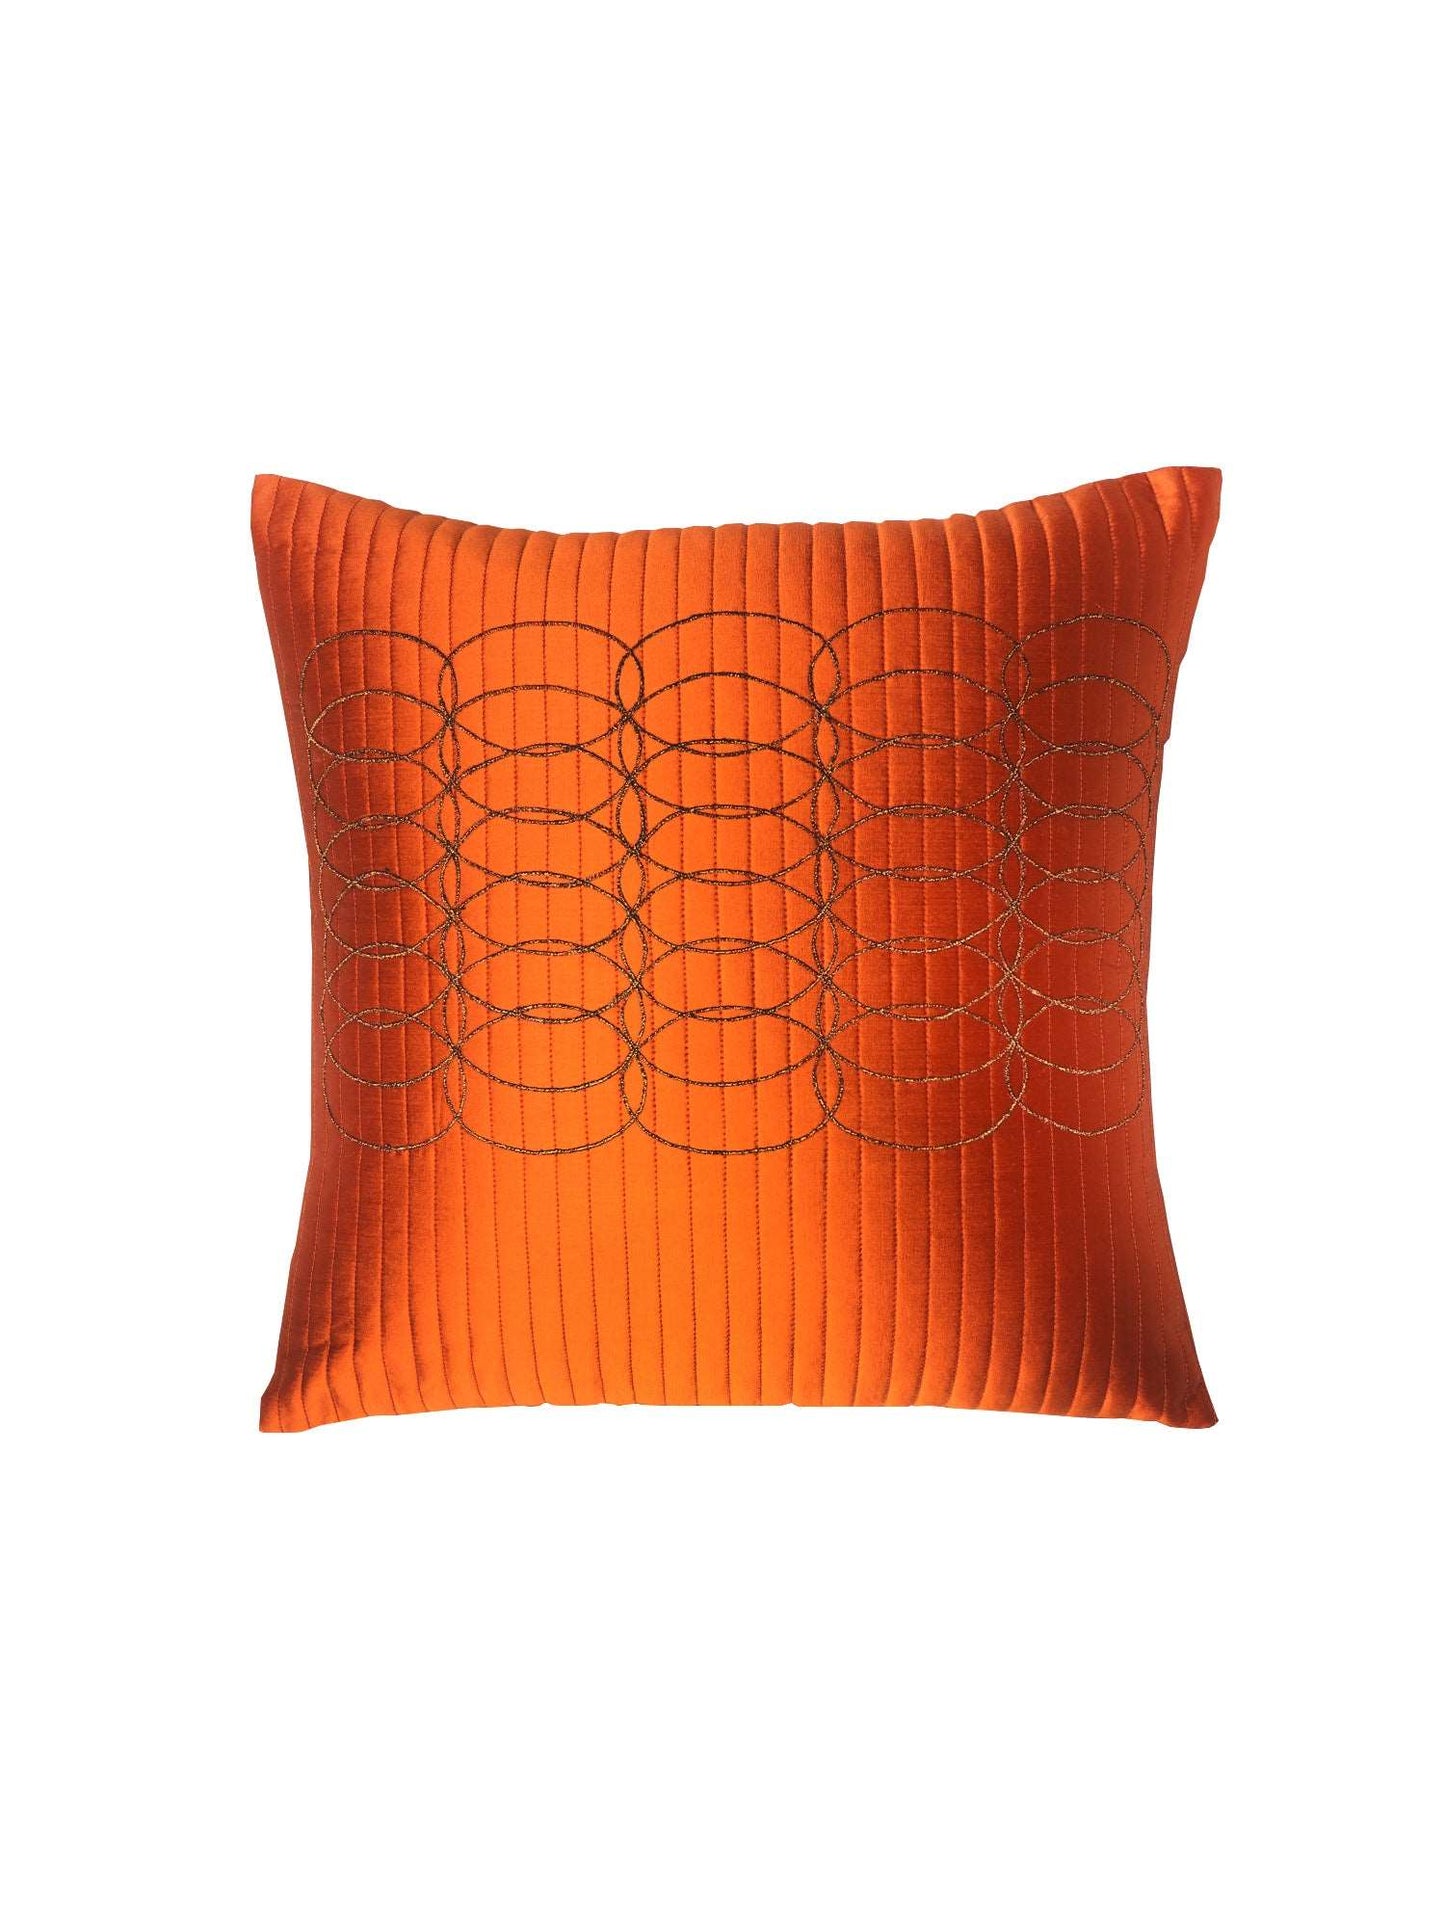 Cushion Cover Polyester Zari Embroidery with Self Quilting Orange - 16"x16"